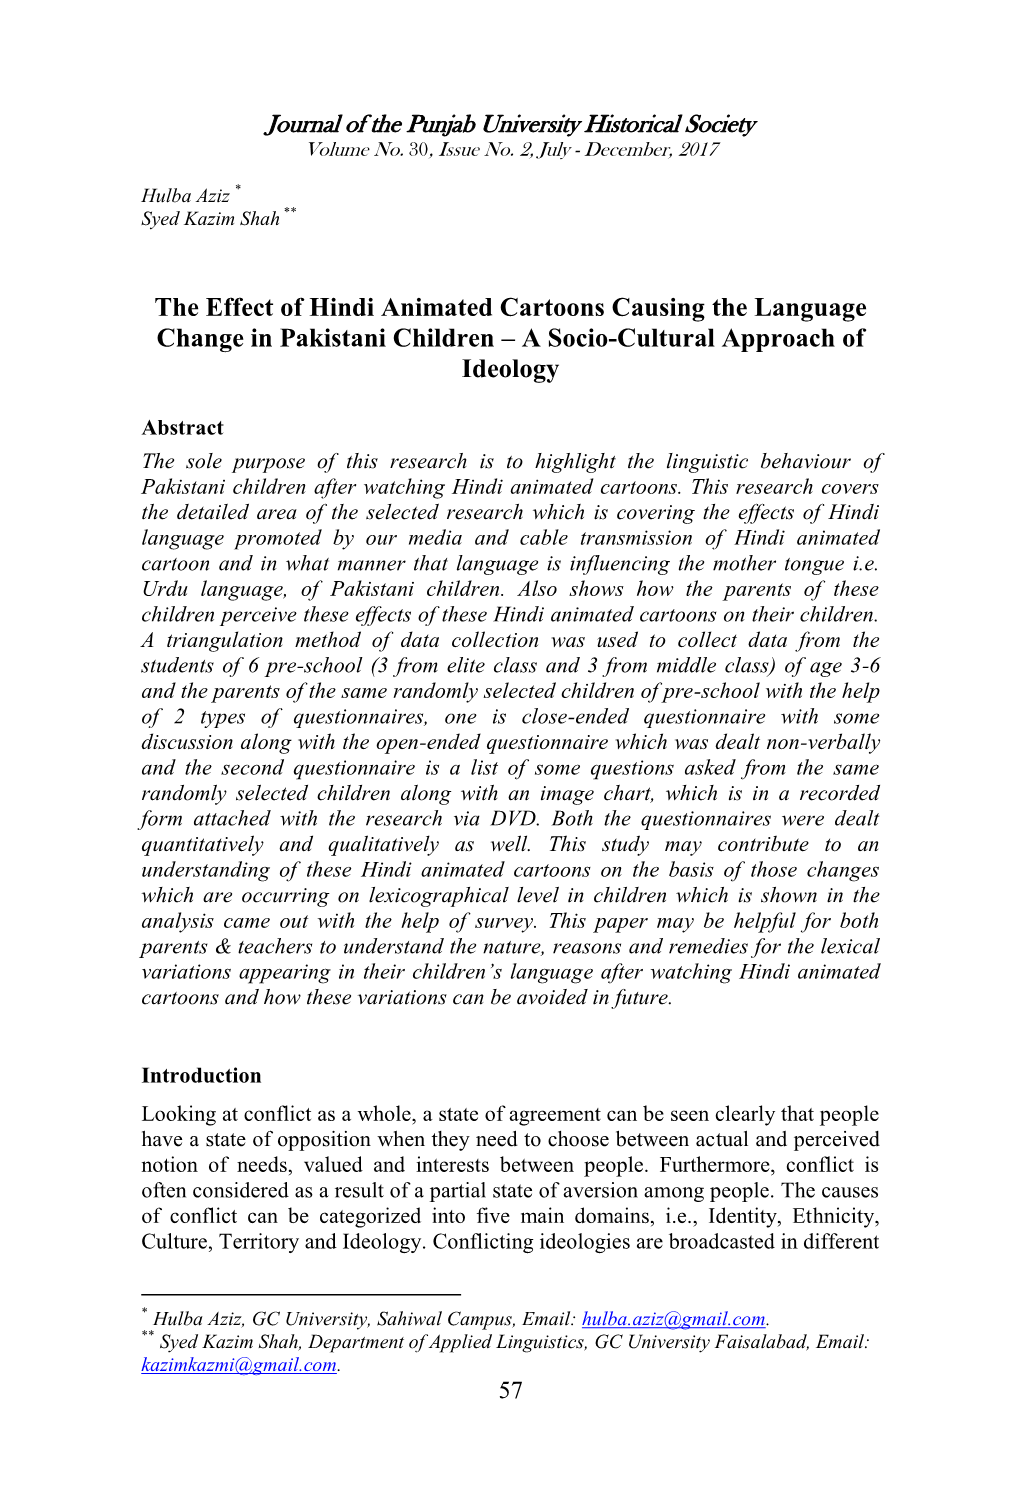 The Effect of Hindi Animated Cartoons Causing the Language Change in Pakistani Children – a Socio-Cultural Approach of Ideology